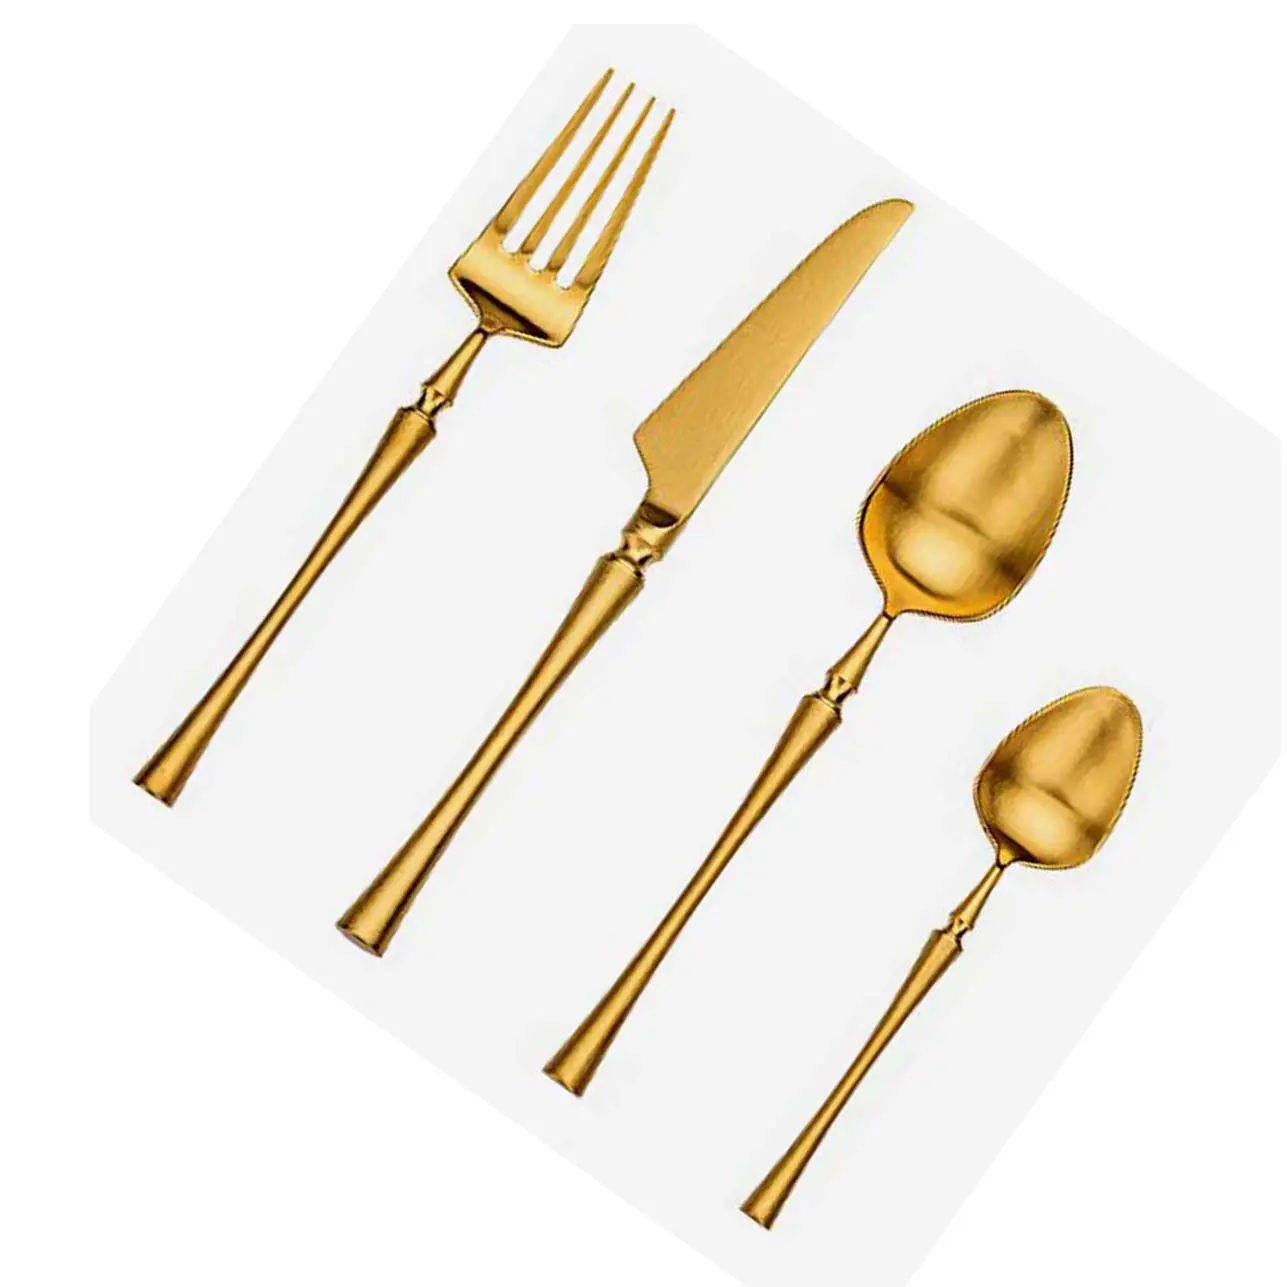 Wholesale Western Style Creative And Easy to Clean Stainless Steel Cutlery Set Including Knife/Fork/Spoon Gold Plated Flatware